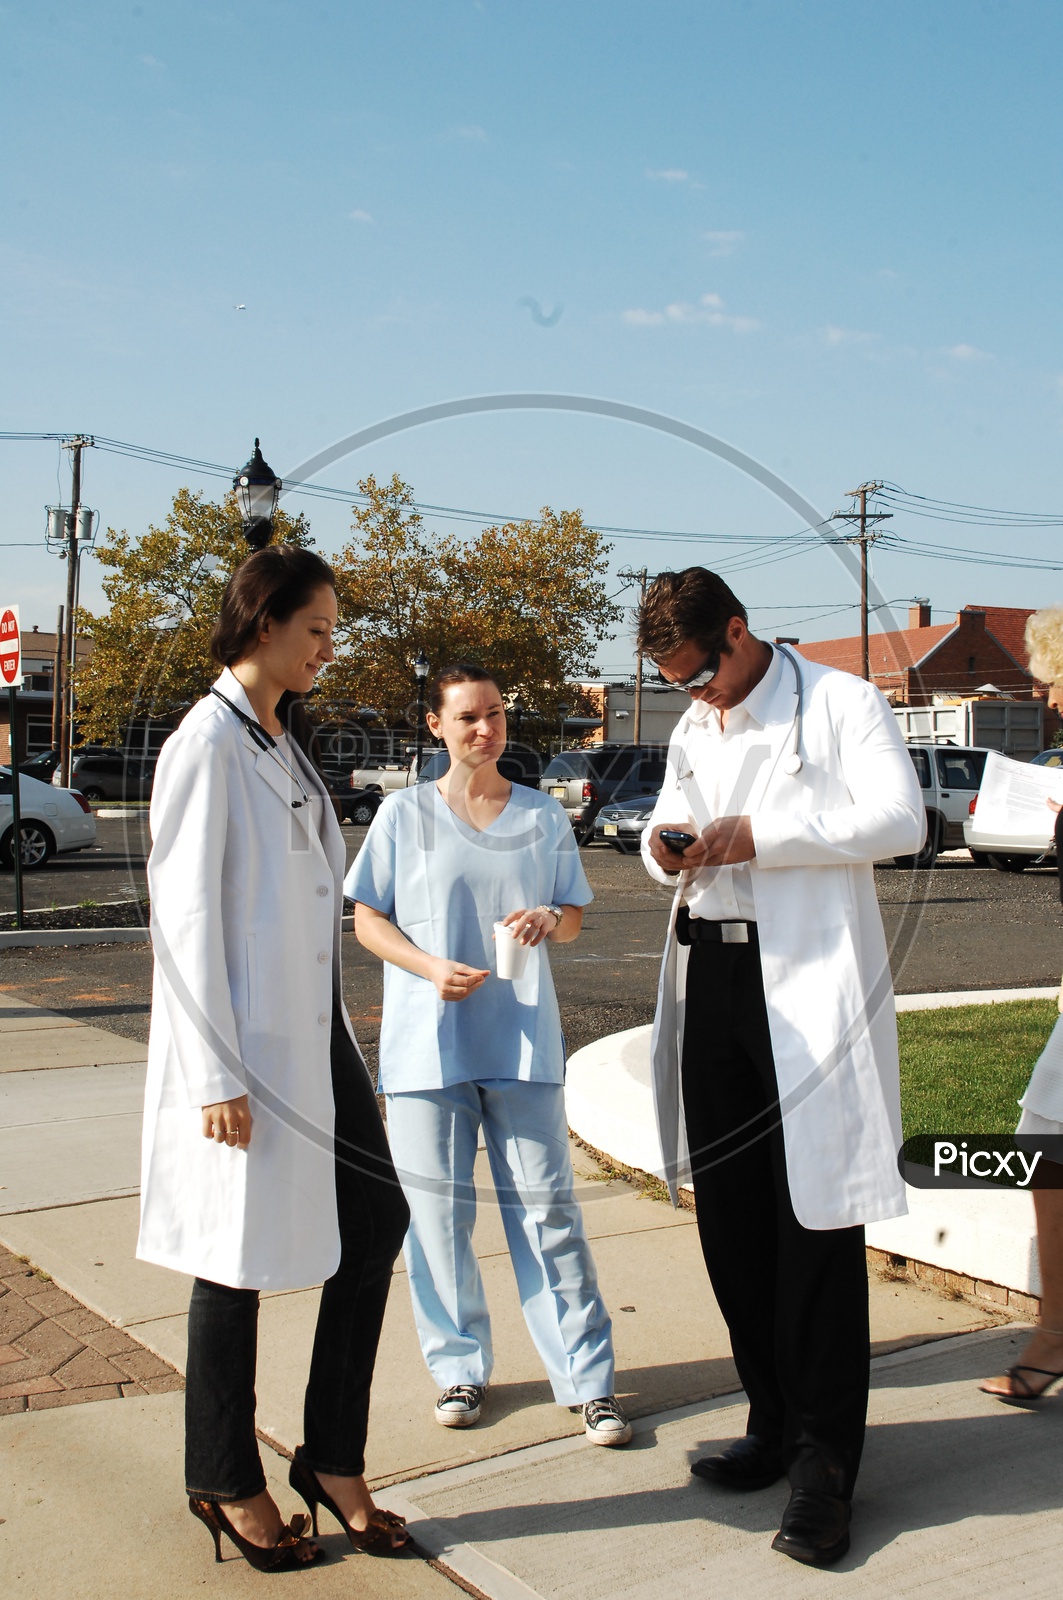 A male and a female doctors wearing white coat with stethoscopes talking to a patient on the road